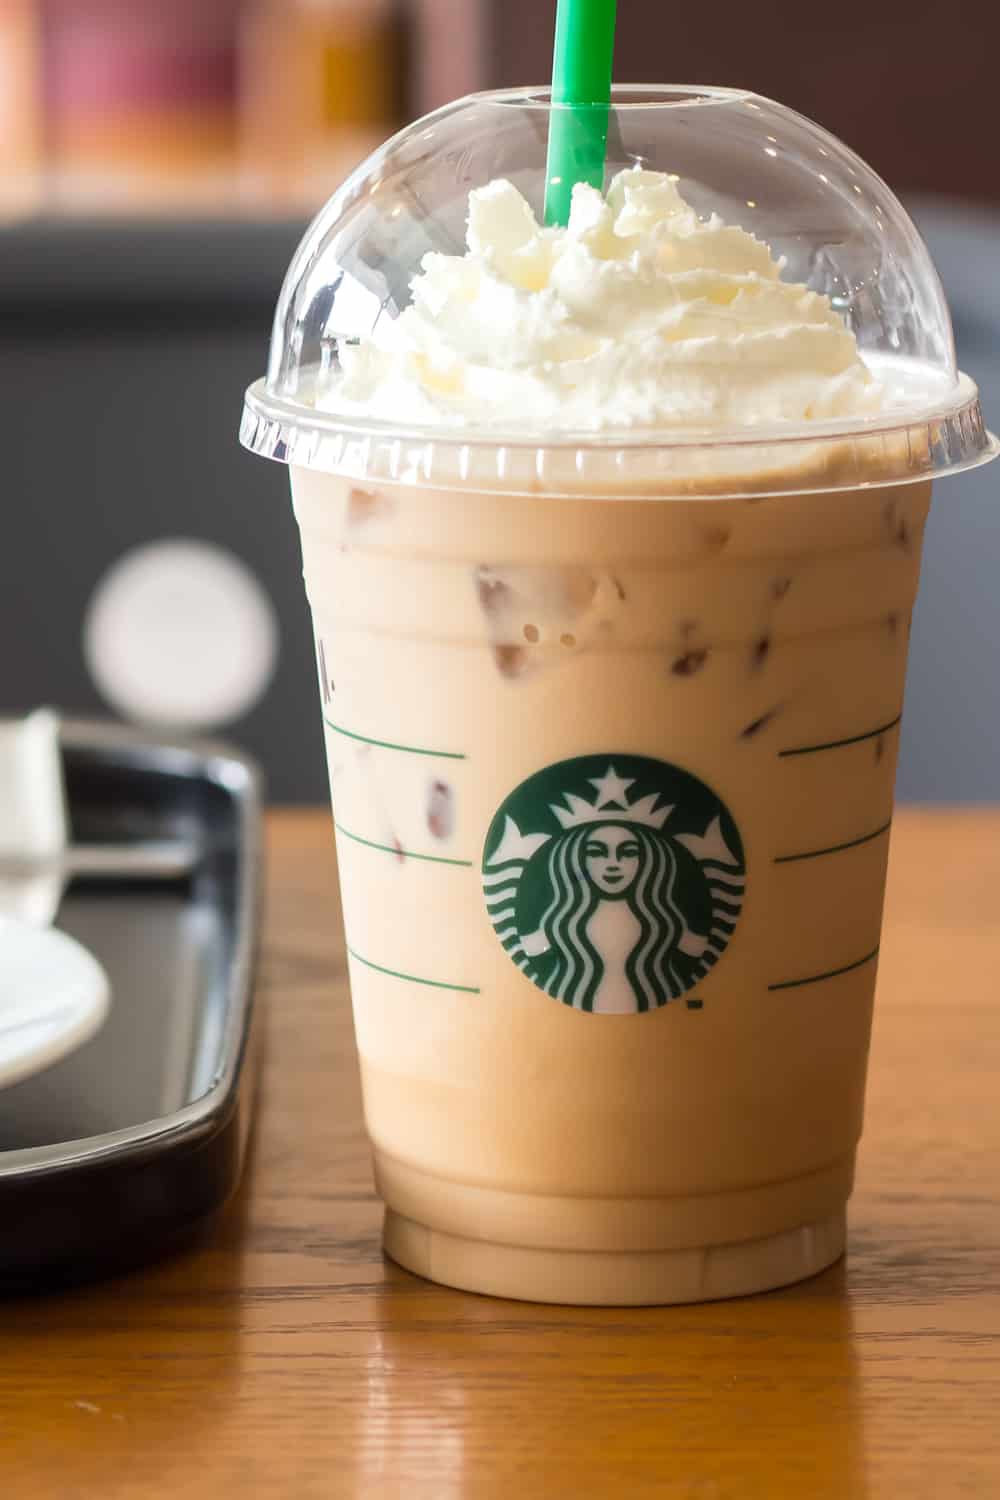 As greater expenses burden benefits, espresso chain cuts profit standpoint, Starbucks income miss